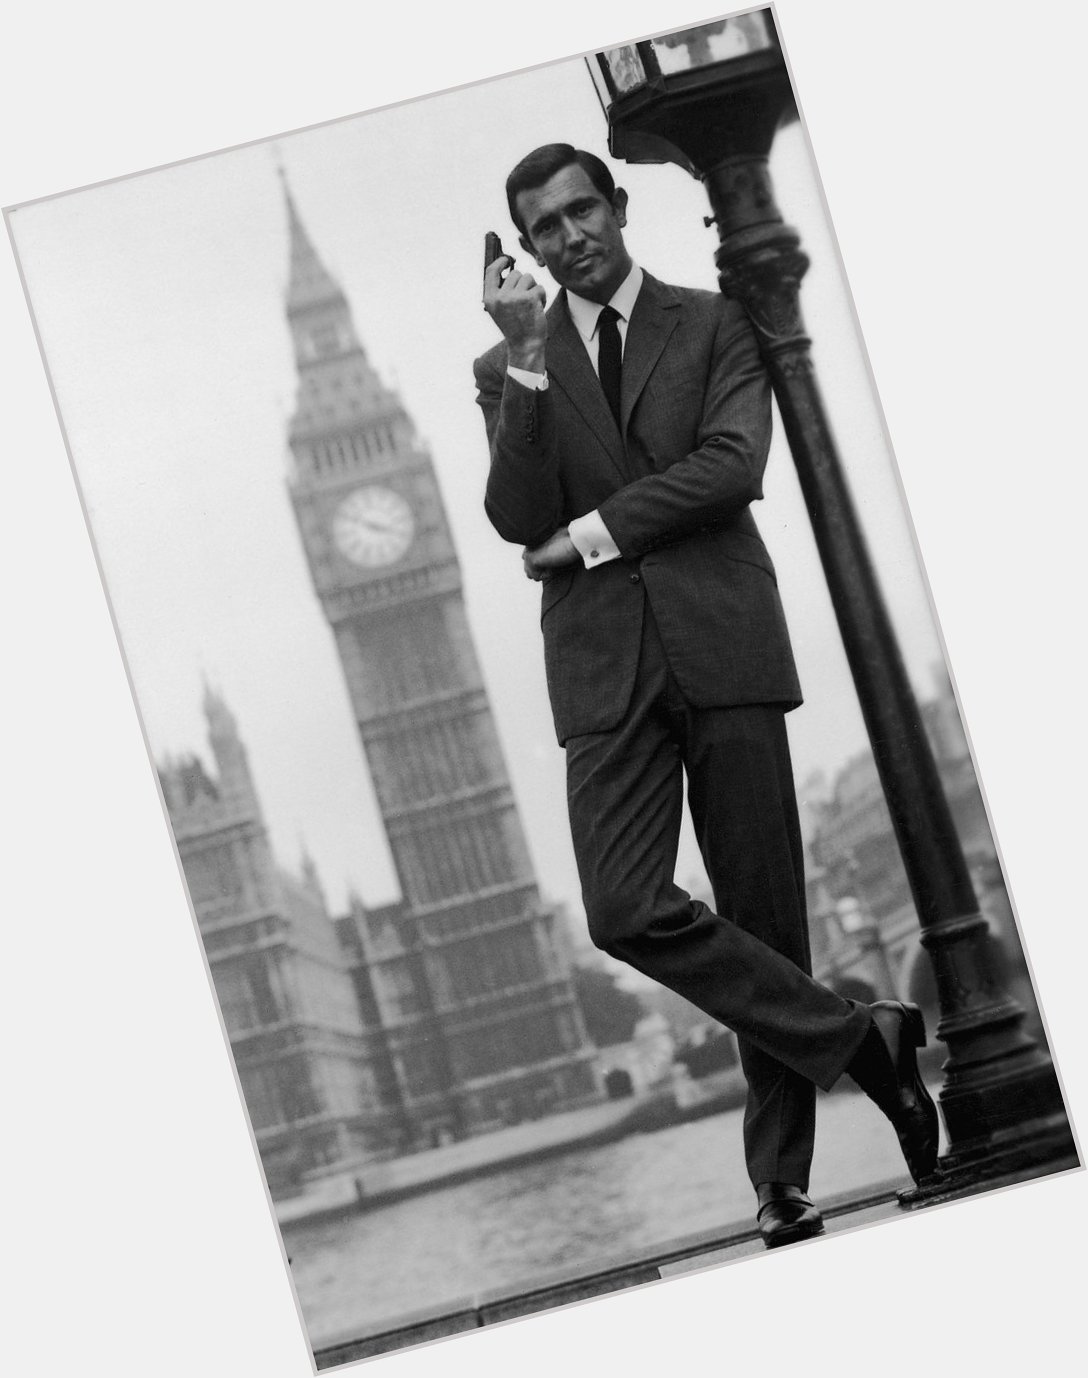 Happy birthday to Australian actor, martial artist and model George Lazenby, born September 5, 1939. 